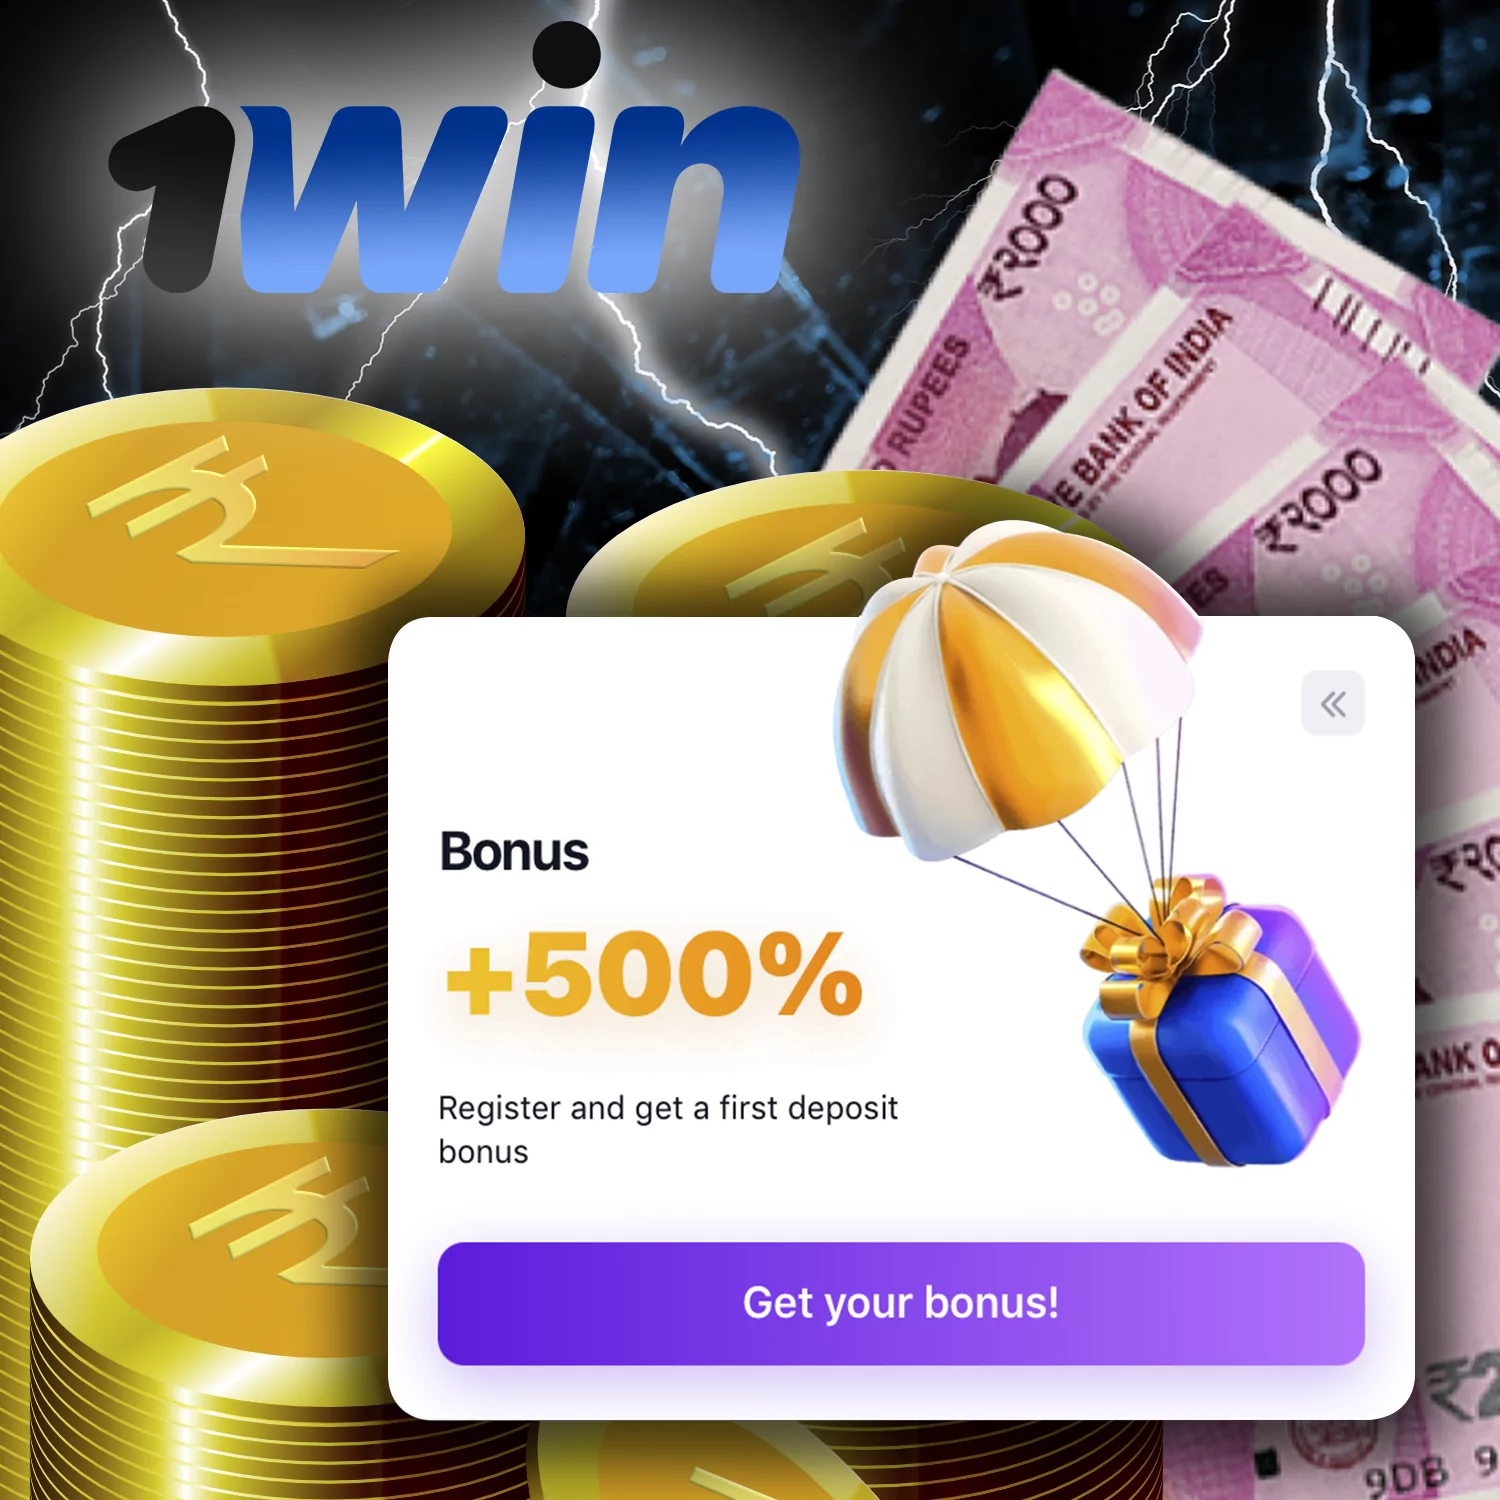 Every new 1win user receives a welcome bonus on your first deposit.